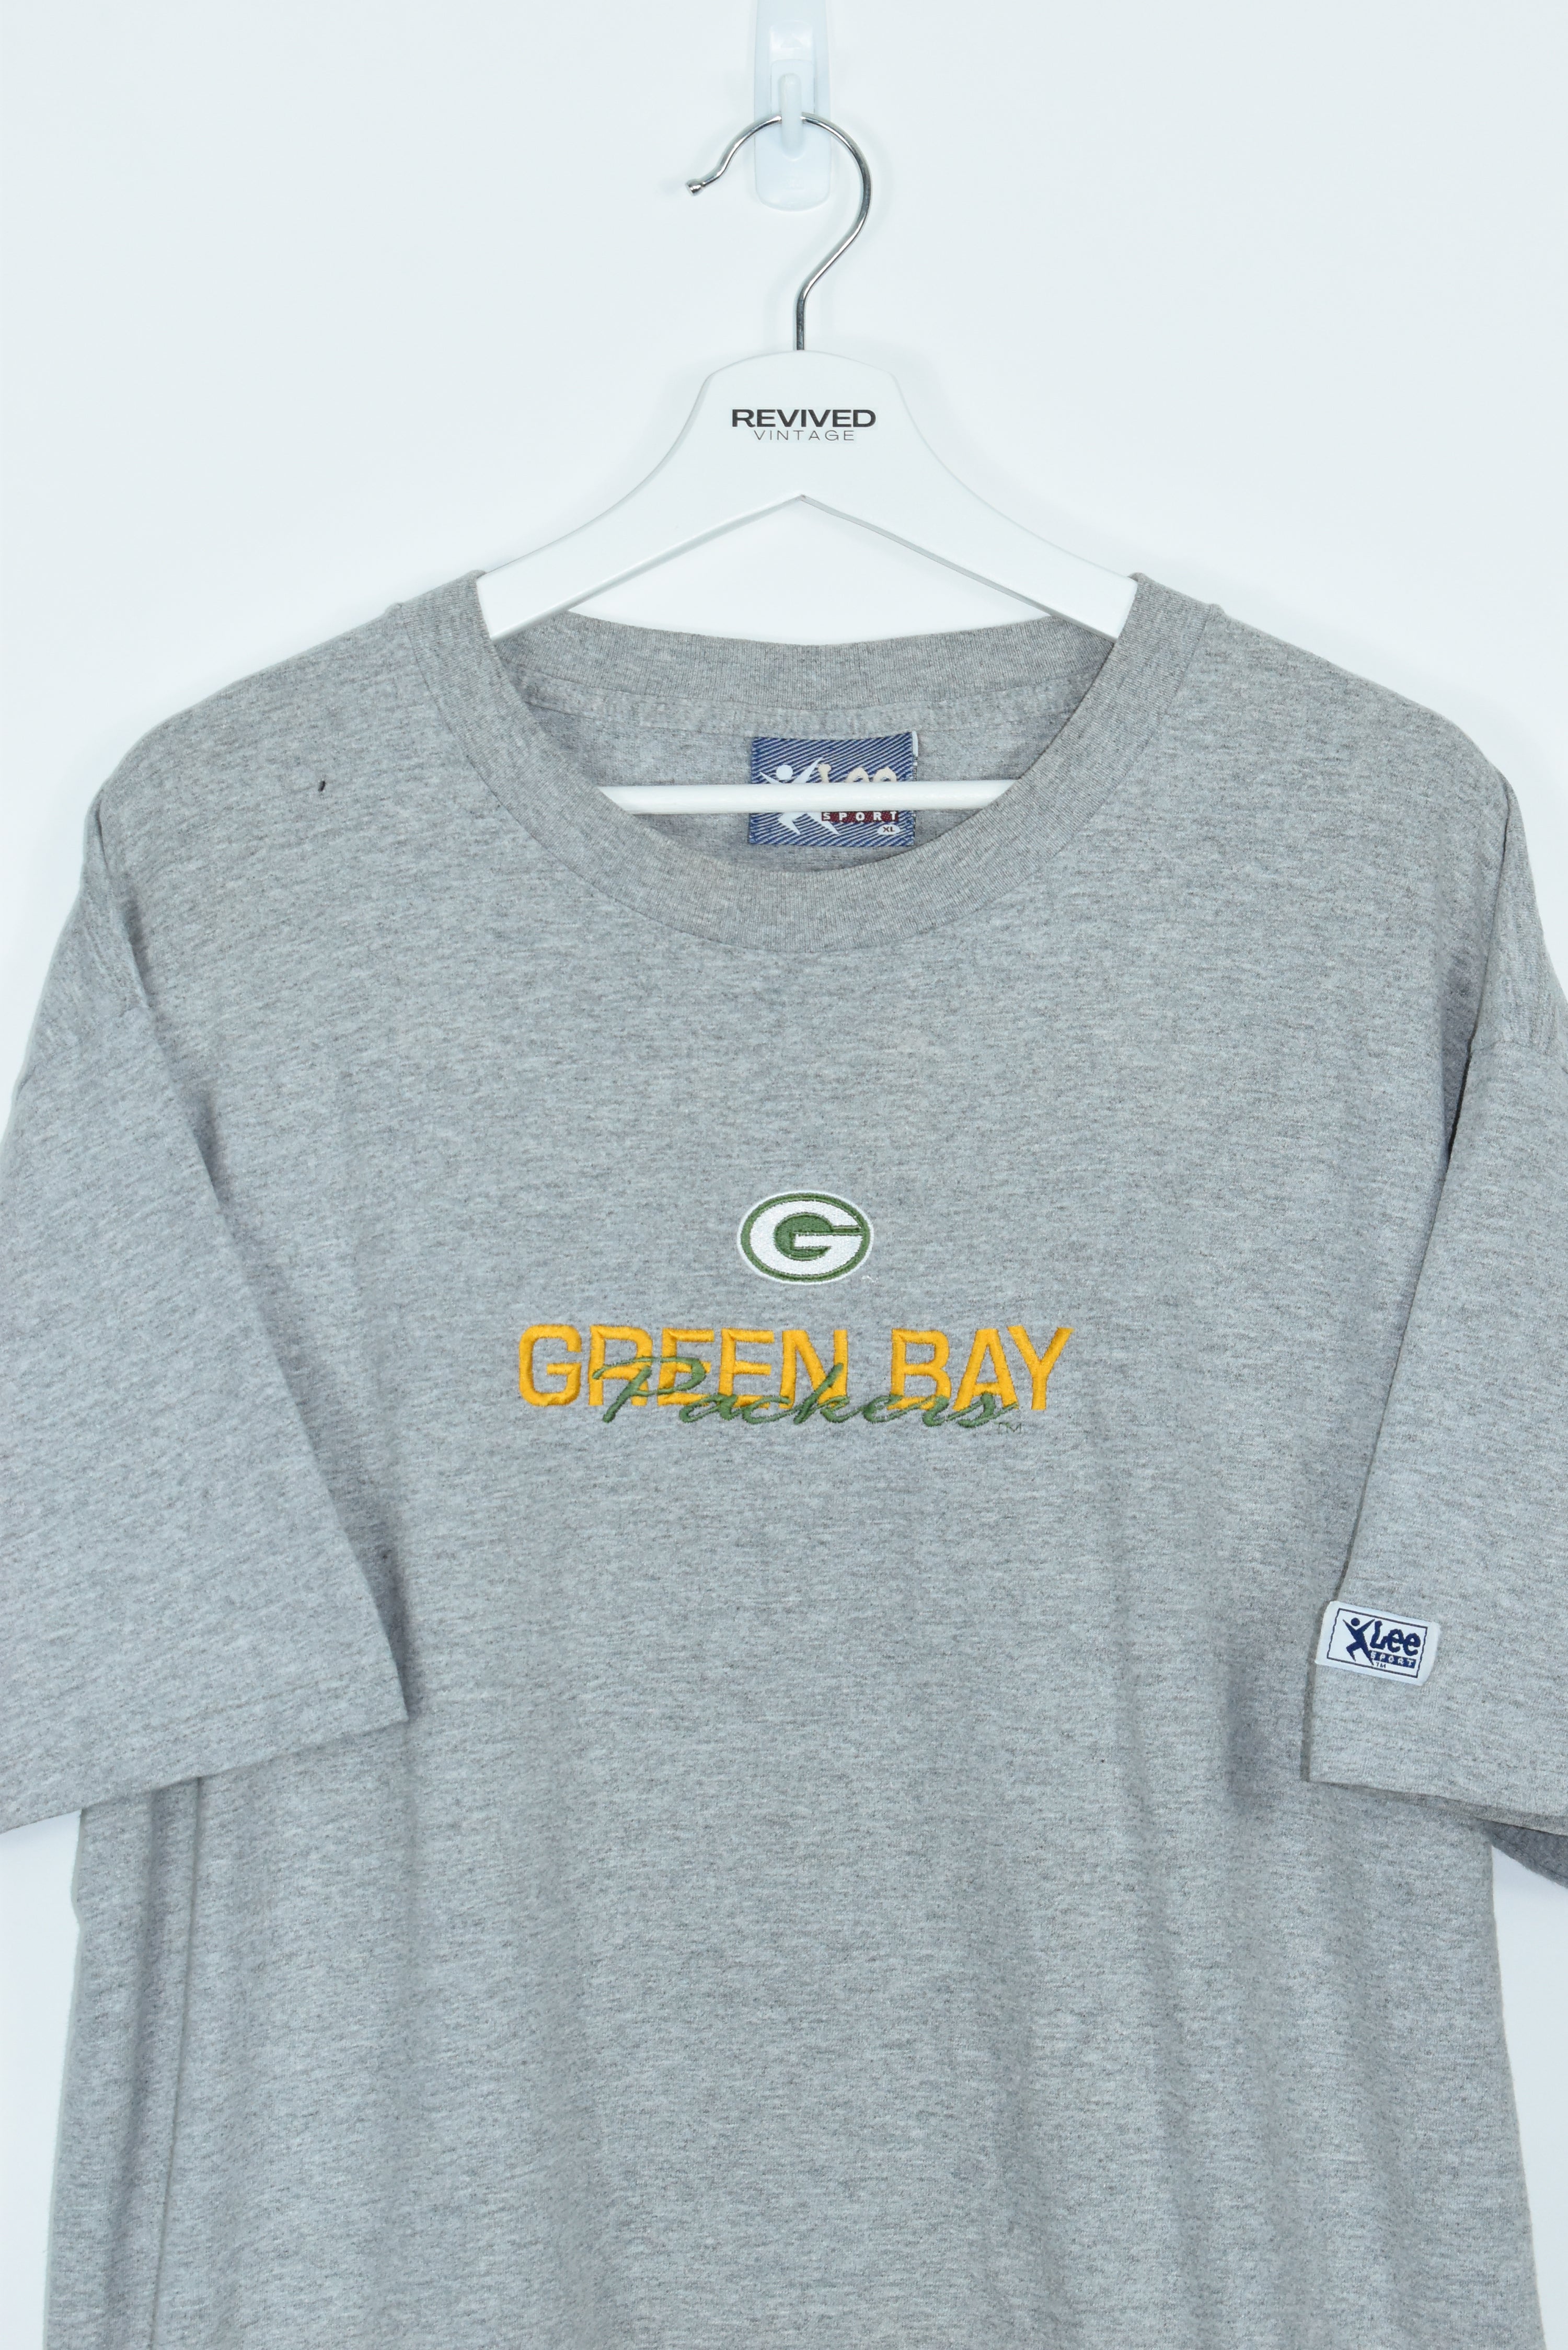 Vintage Green Bay Packers Embroidery T Shirt Xlarge